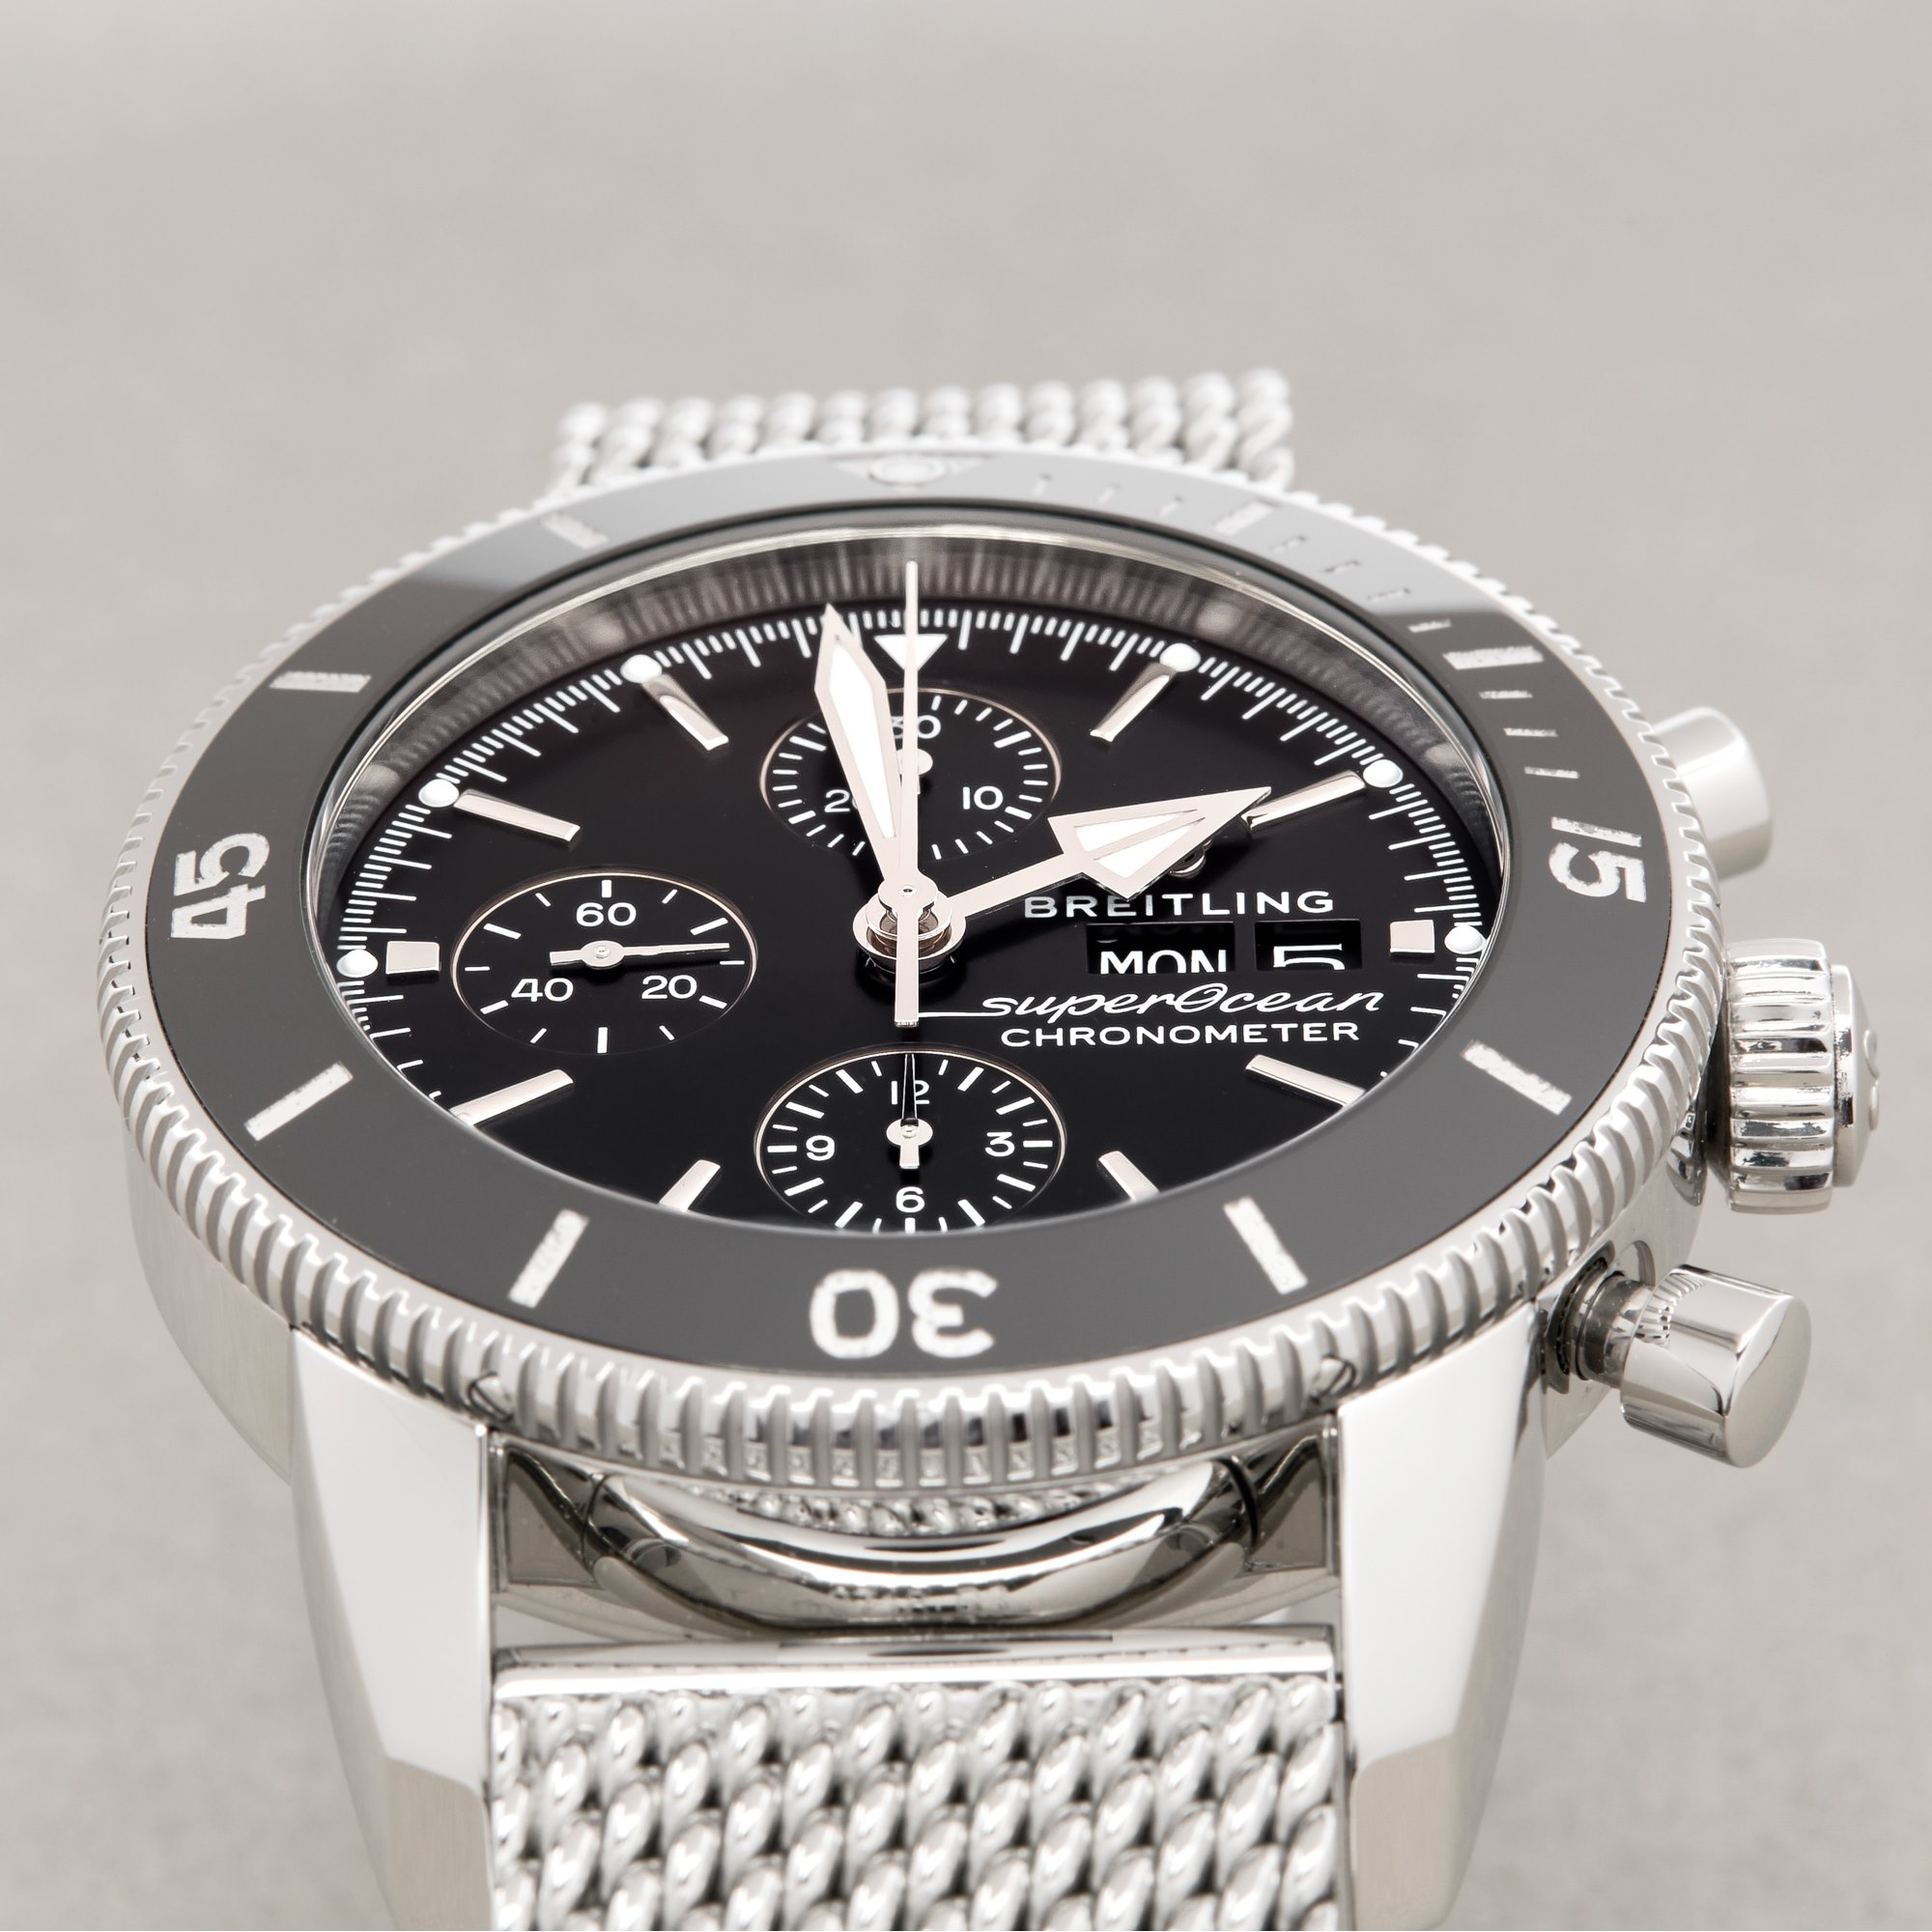 Breitling Superocean II Chronograph Stainless Steel A133121B1A1